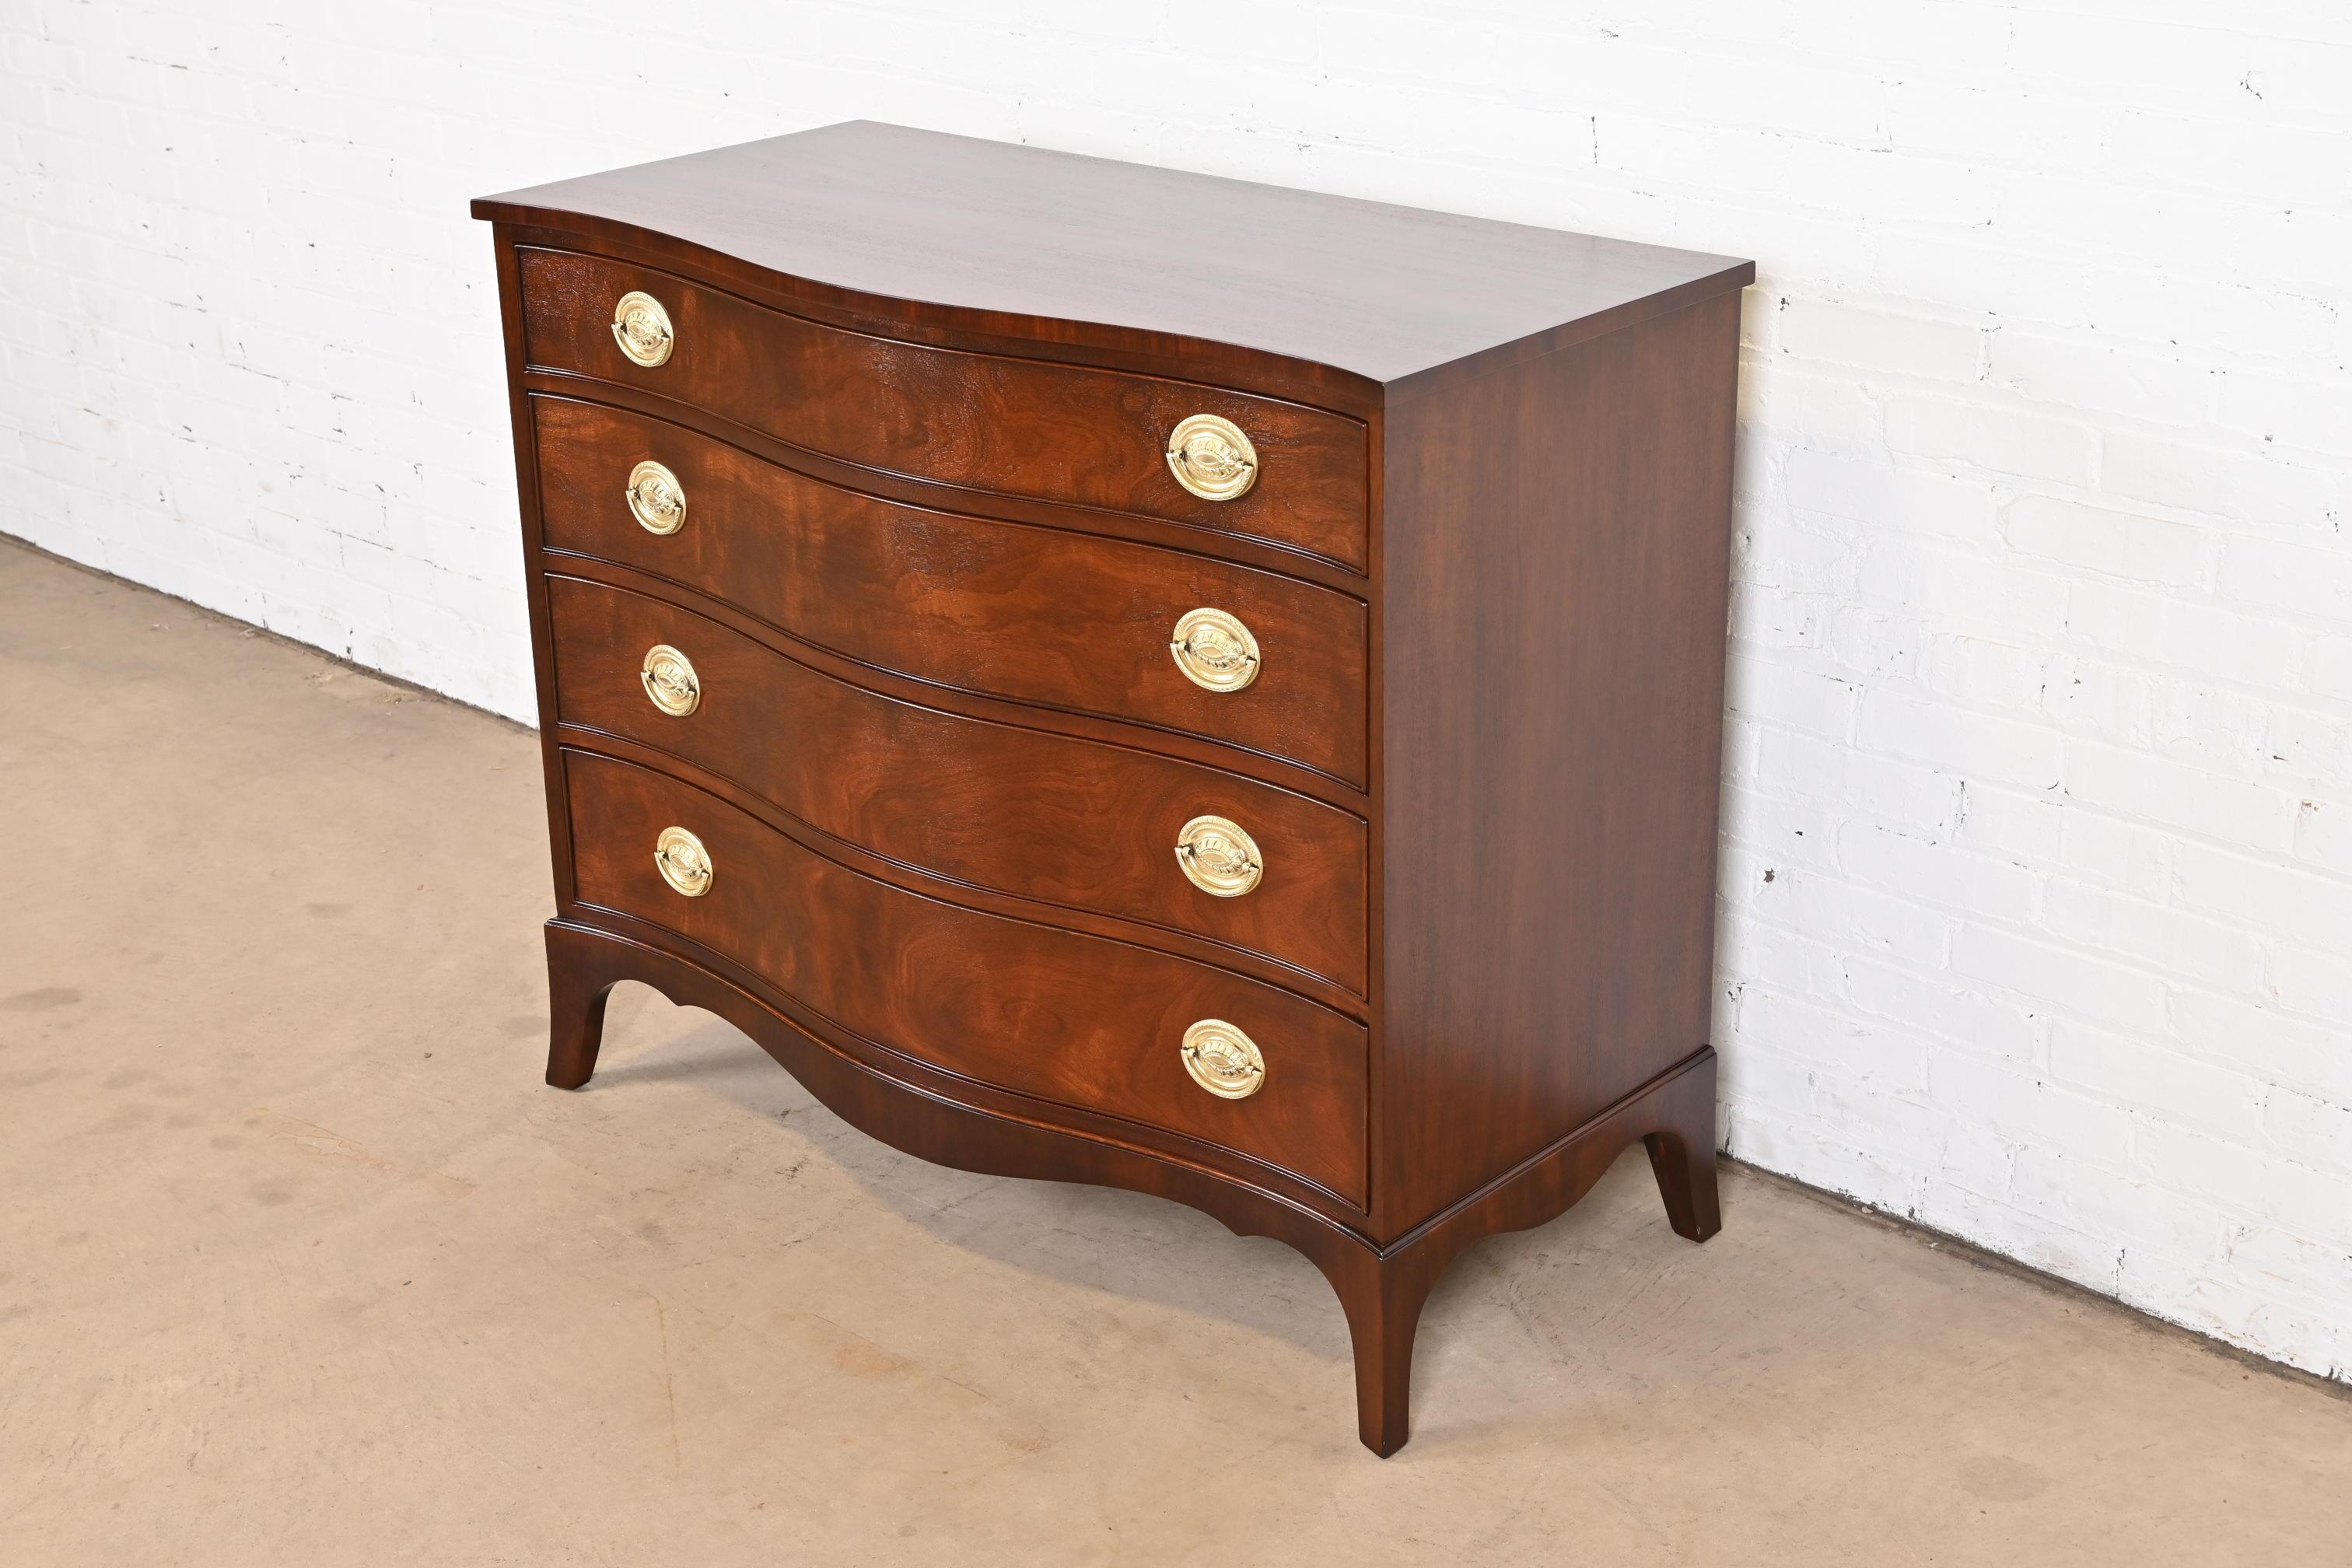 20th Century Kindel Furniture Georgian Mahogany Serpentine Front Chest of Drawers, Refinished